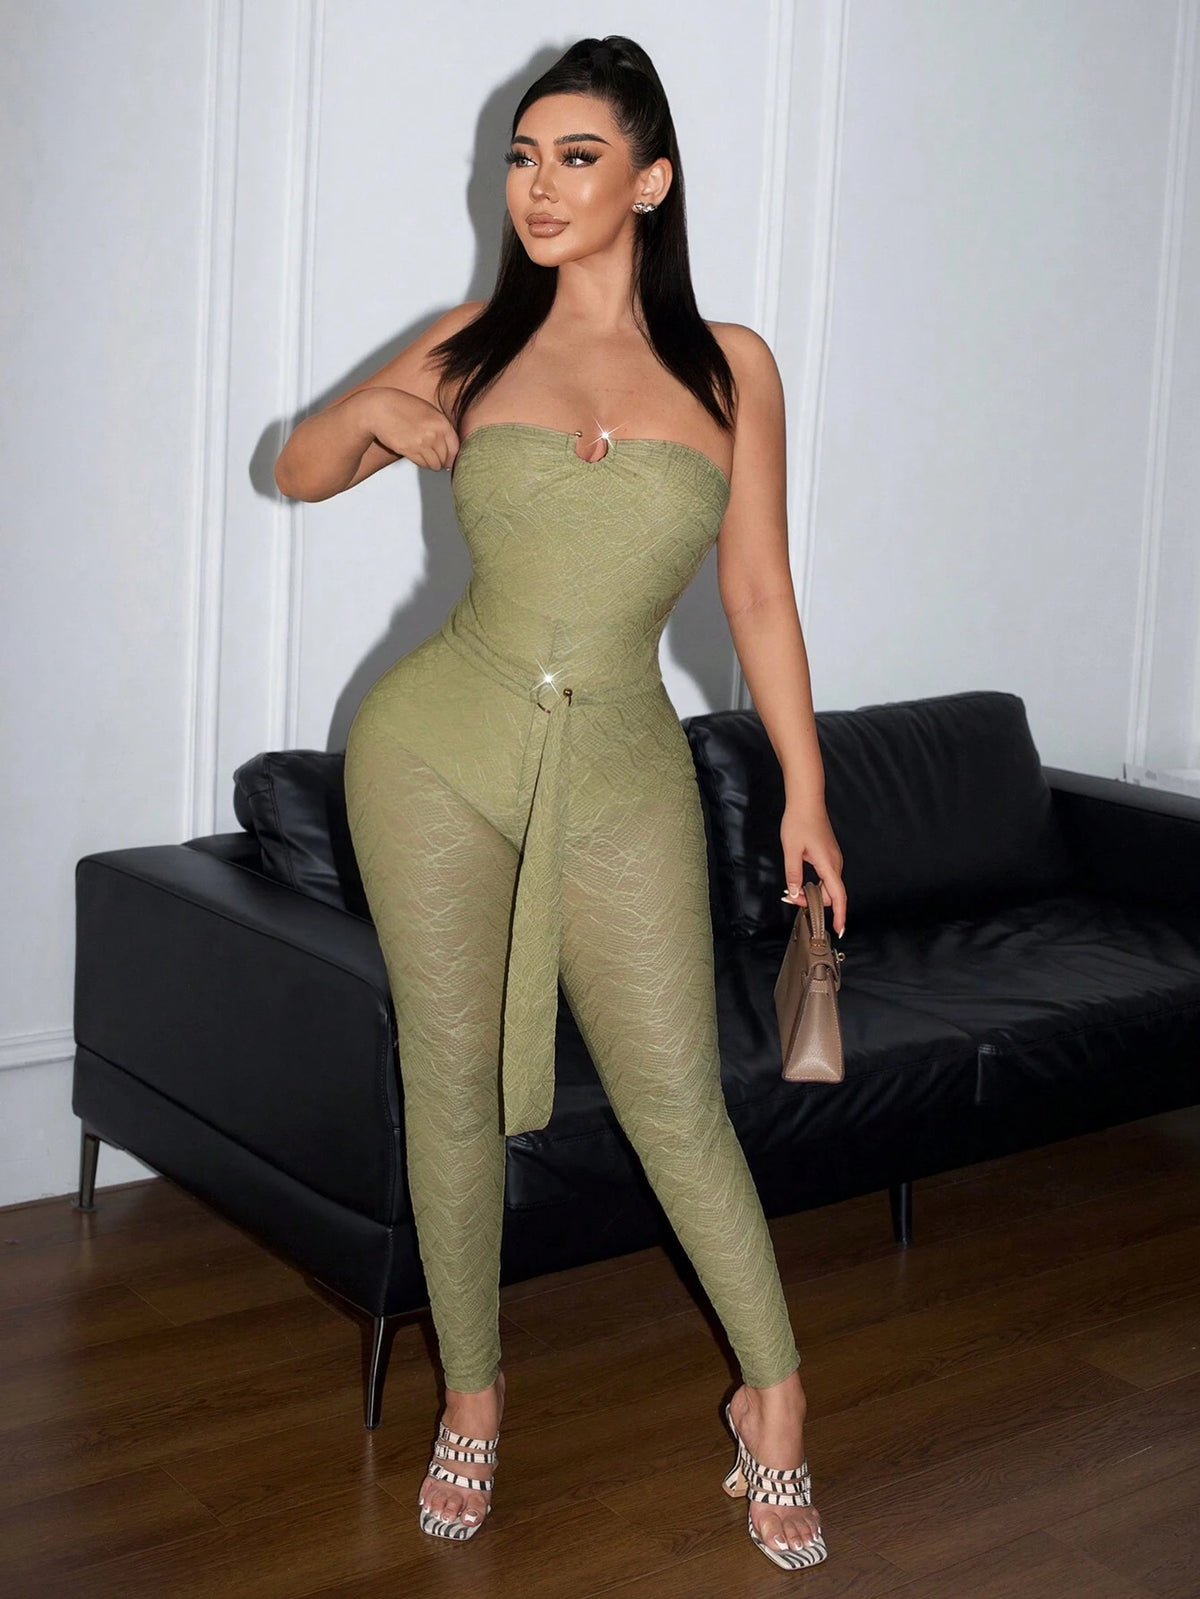 Women Summer Party Dress Sexy Strapless Tight Jumpsuit With Rounded Arc